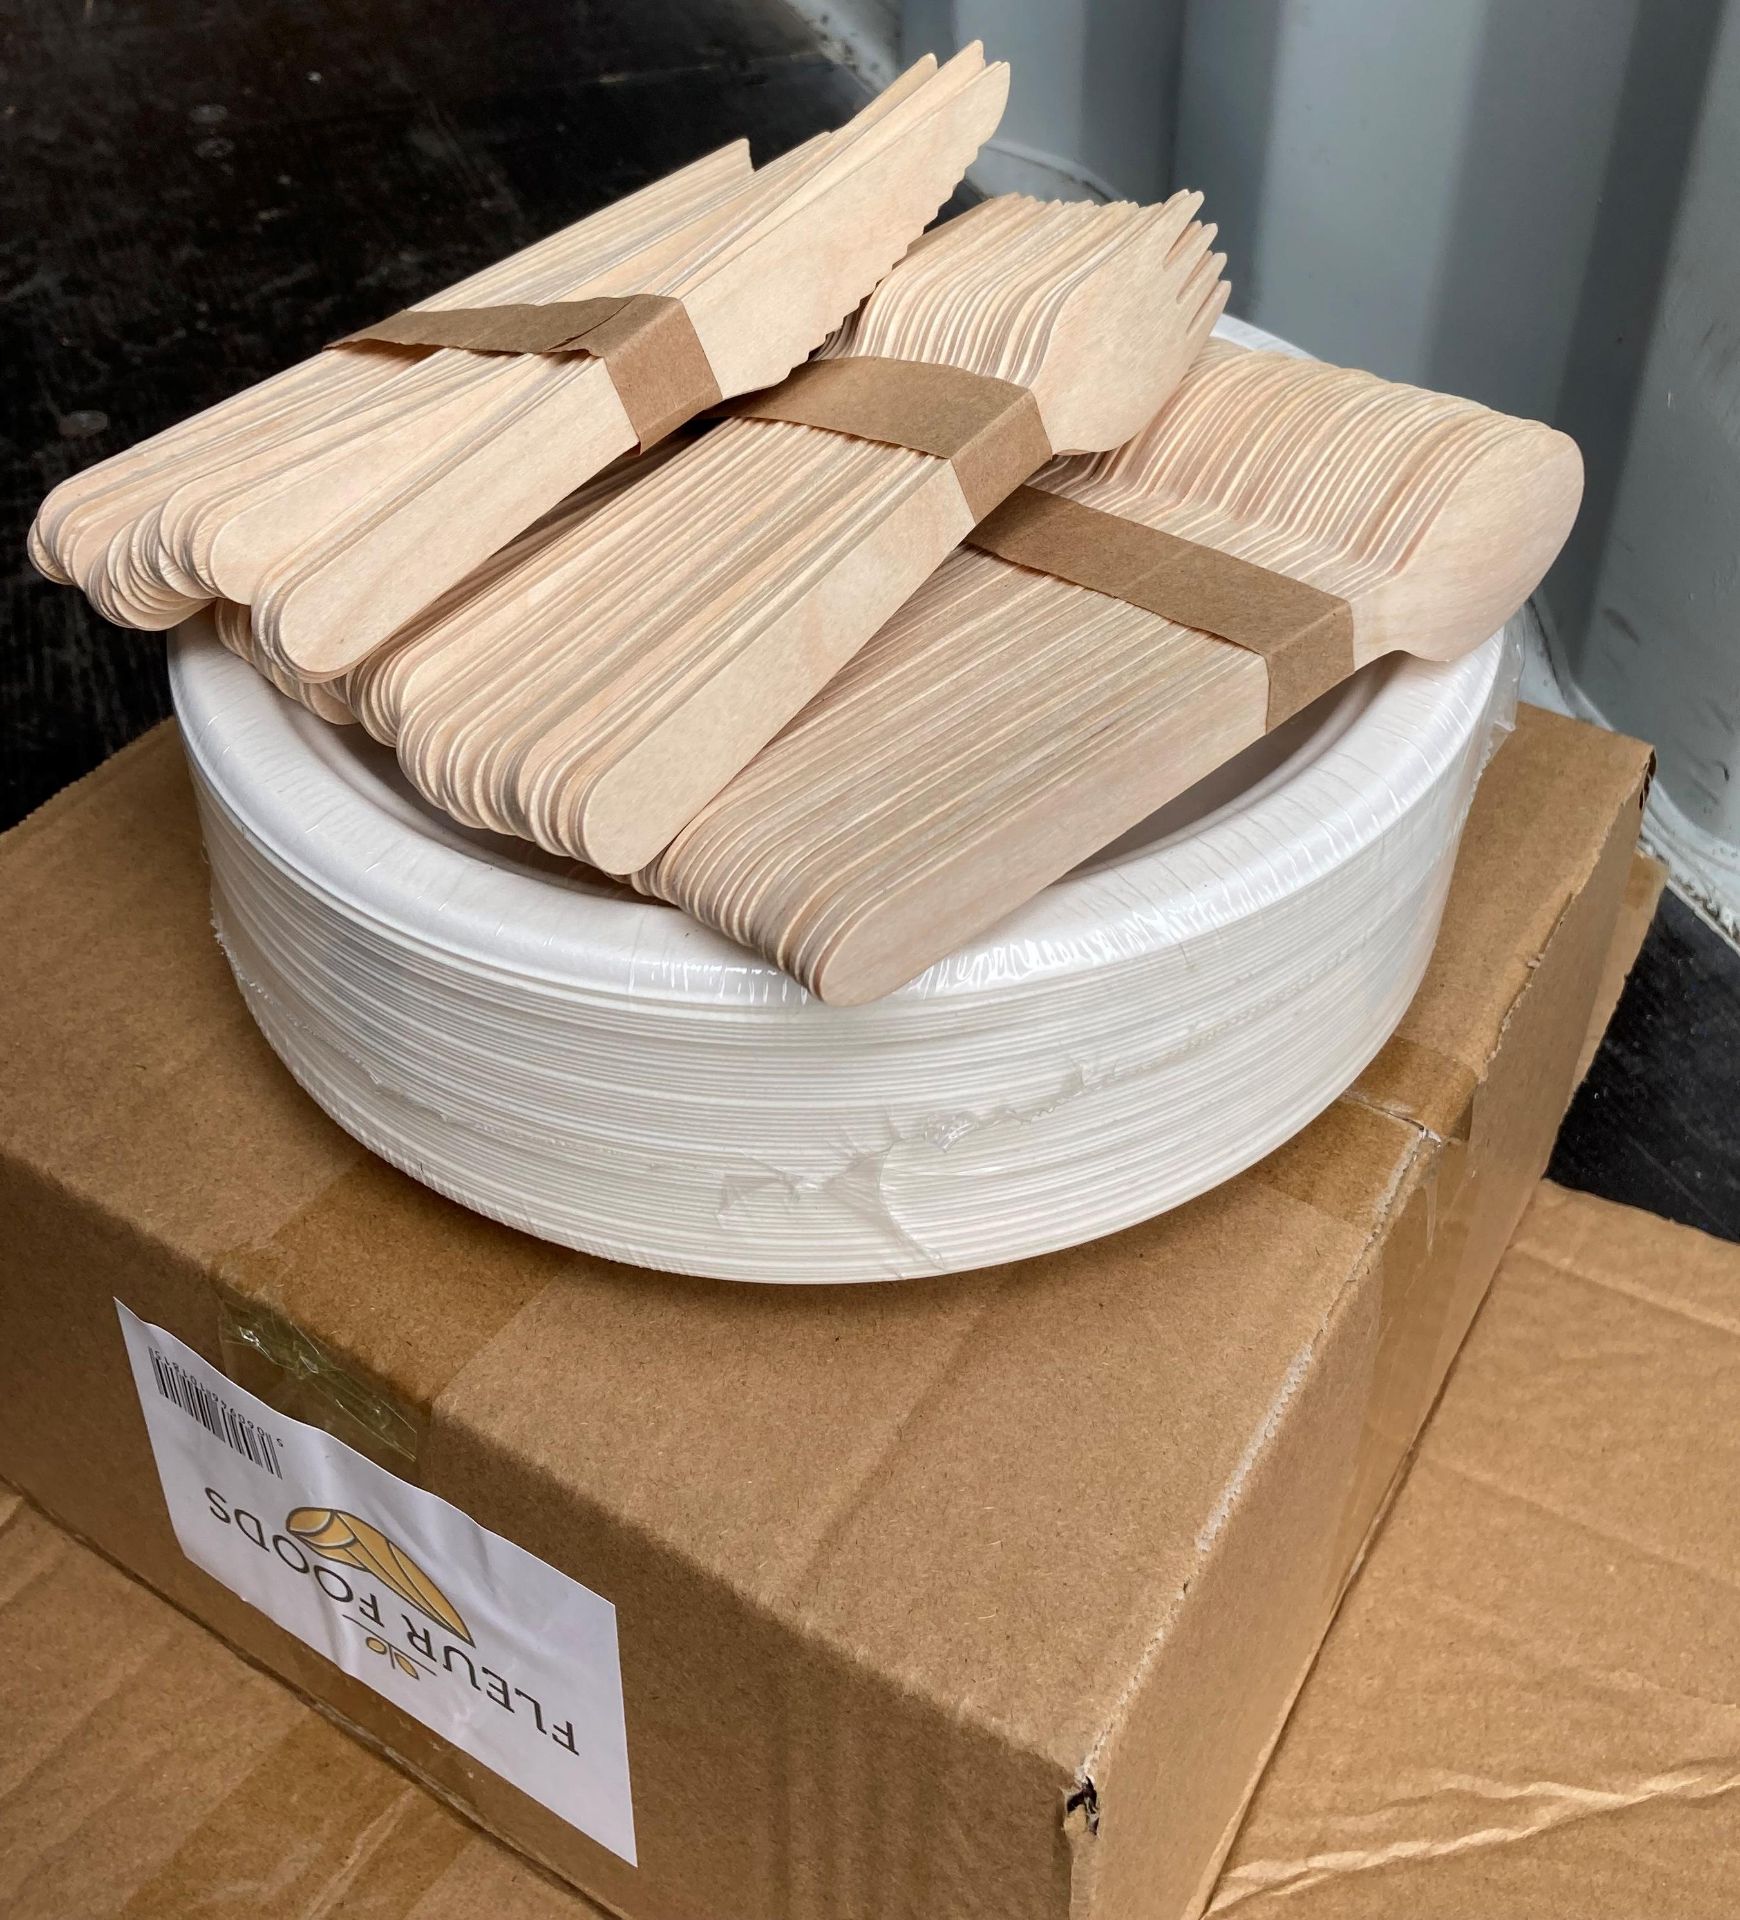 36 x packs and contents of approximately 60 x paper plates, sets of wooden knives, - Image 2 of 5